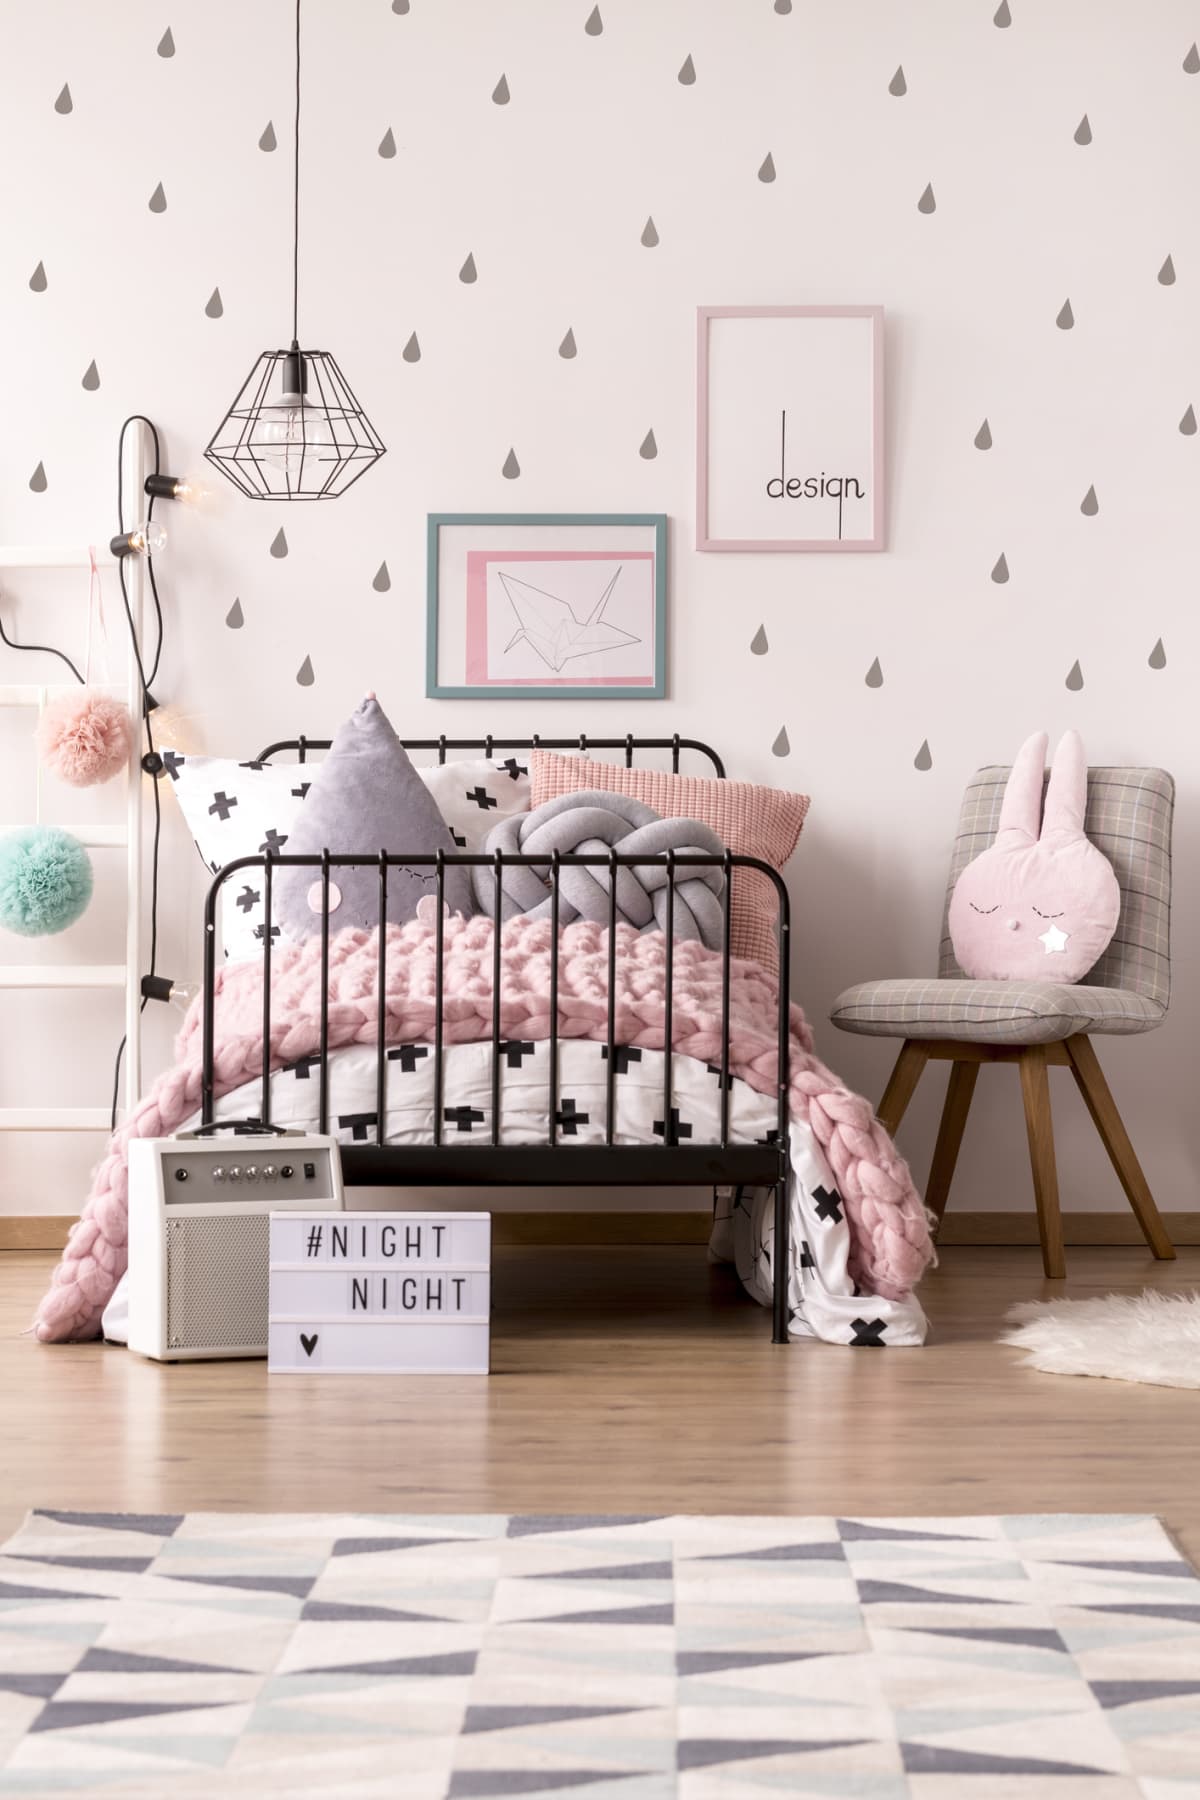 Pink knit blanket on girl's bed against the wall with posters in pastel bedroom interior with chair